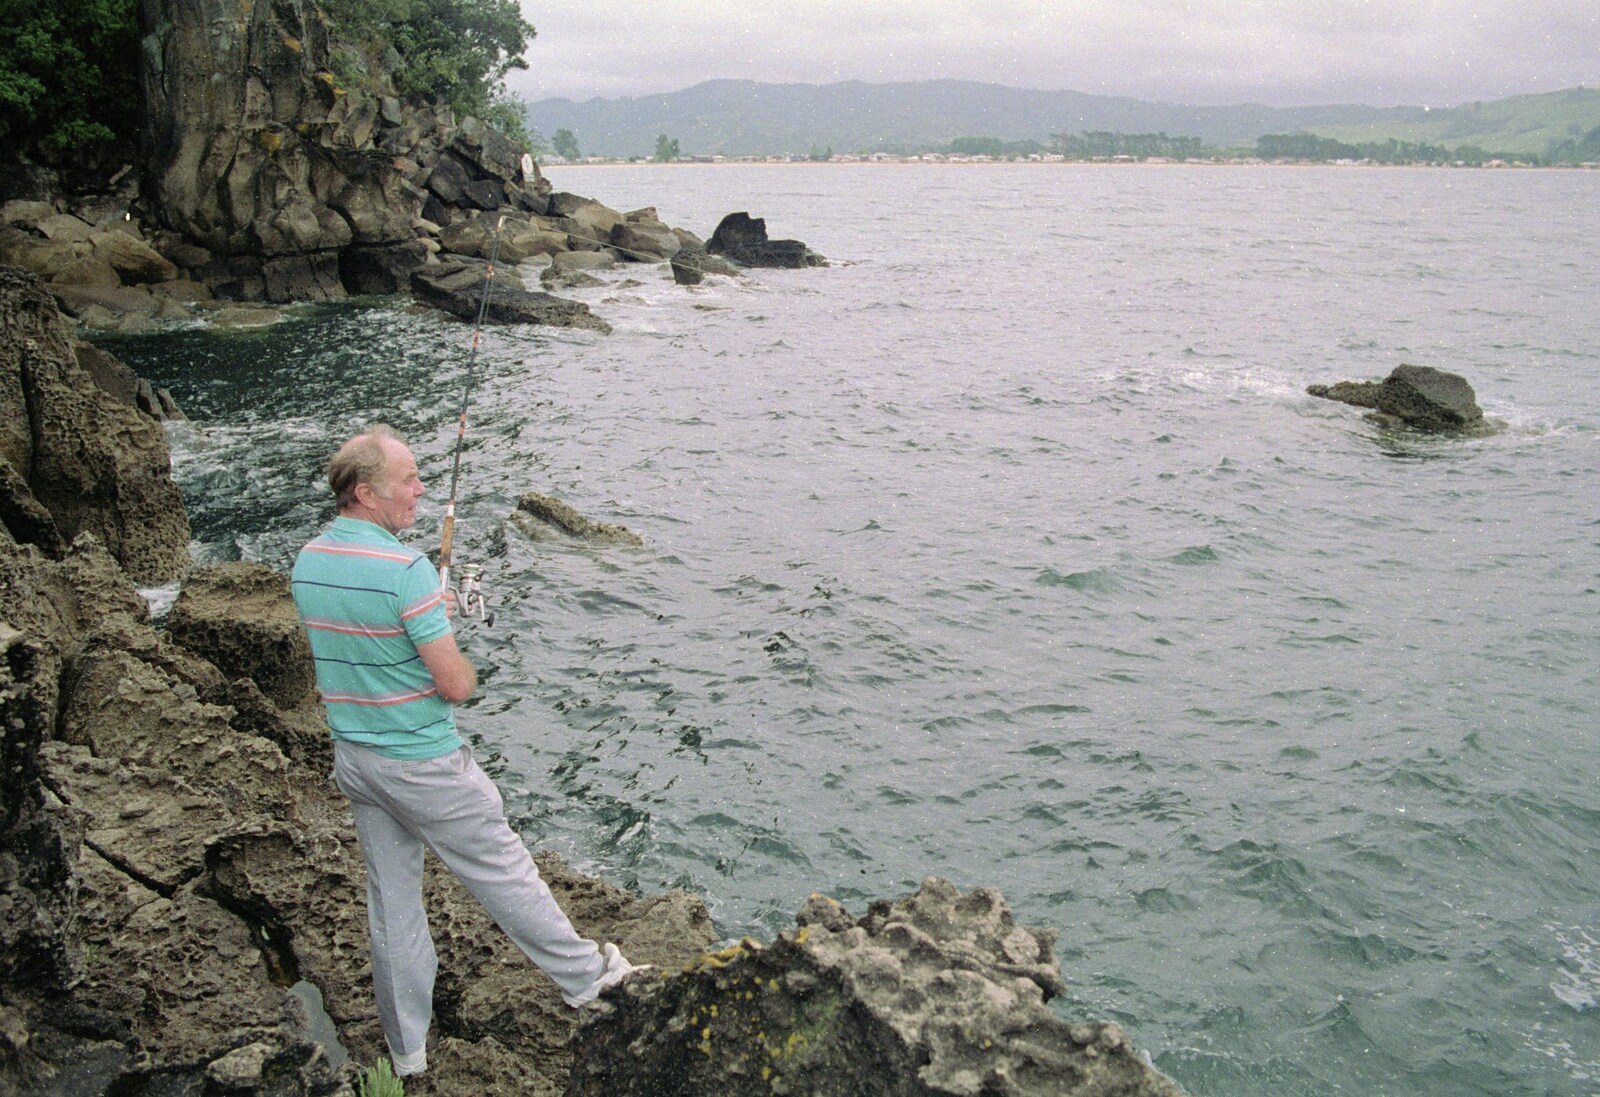 The Old Chap casts his line from Ferry Landing, Whitianga, New Zealand - 23rd November 1992